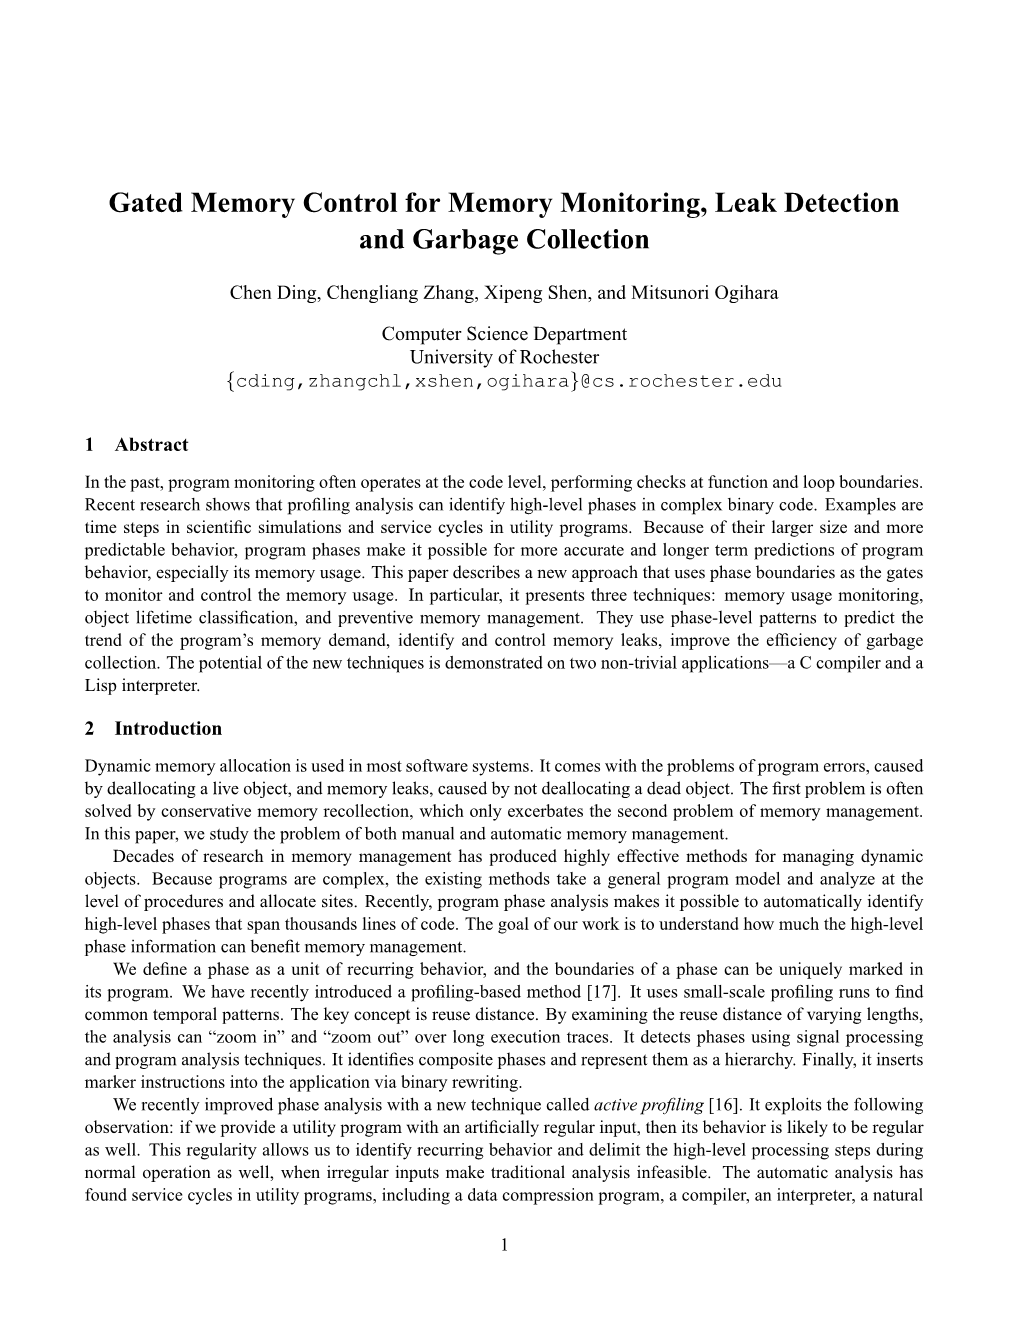 Gated Memory Control for Memory Monitoring, Leak Detection and Garbage Collection